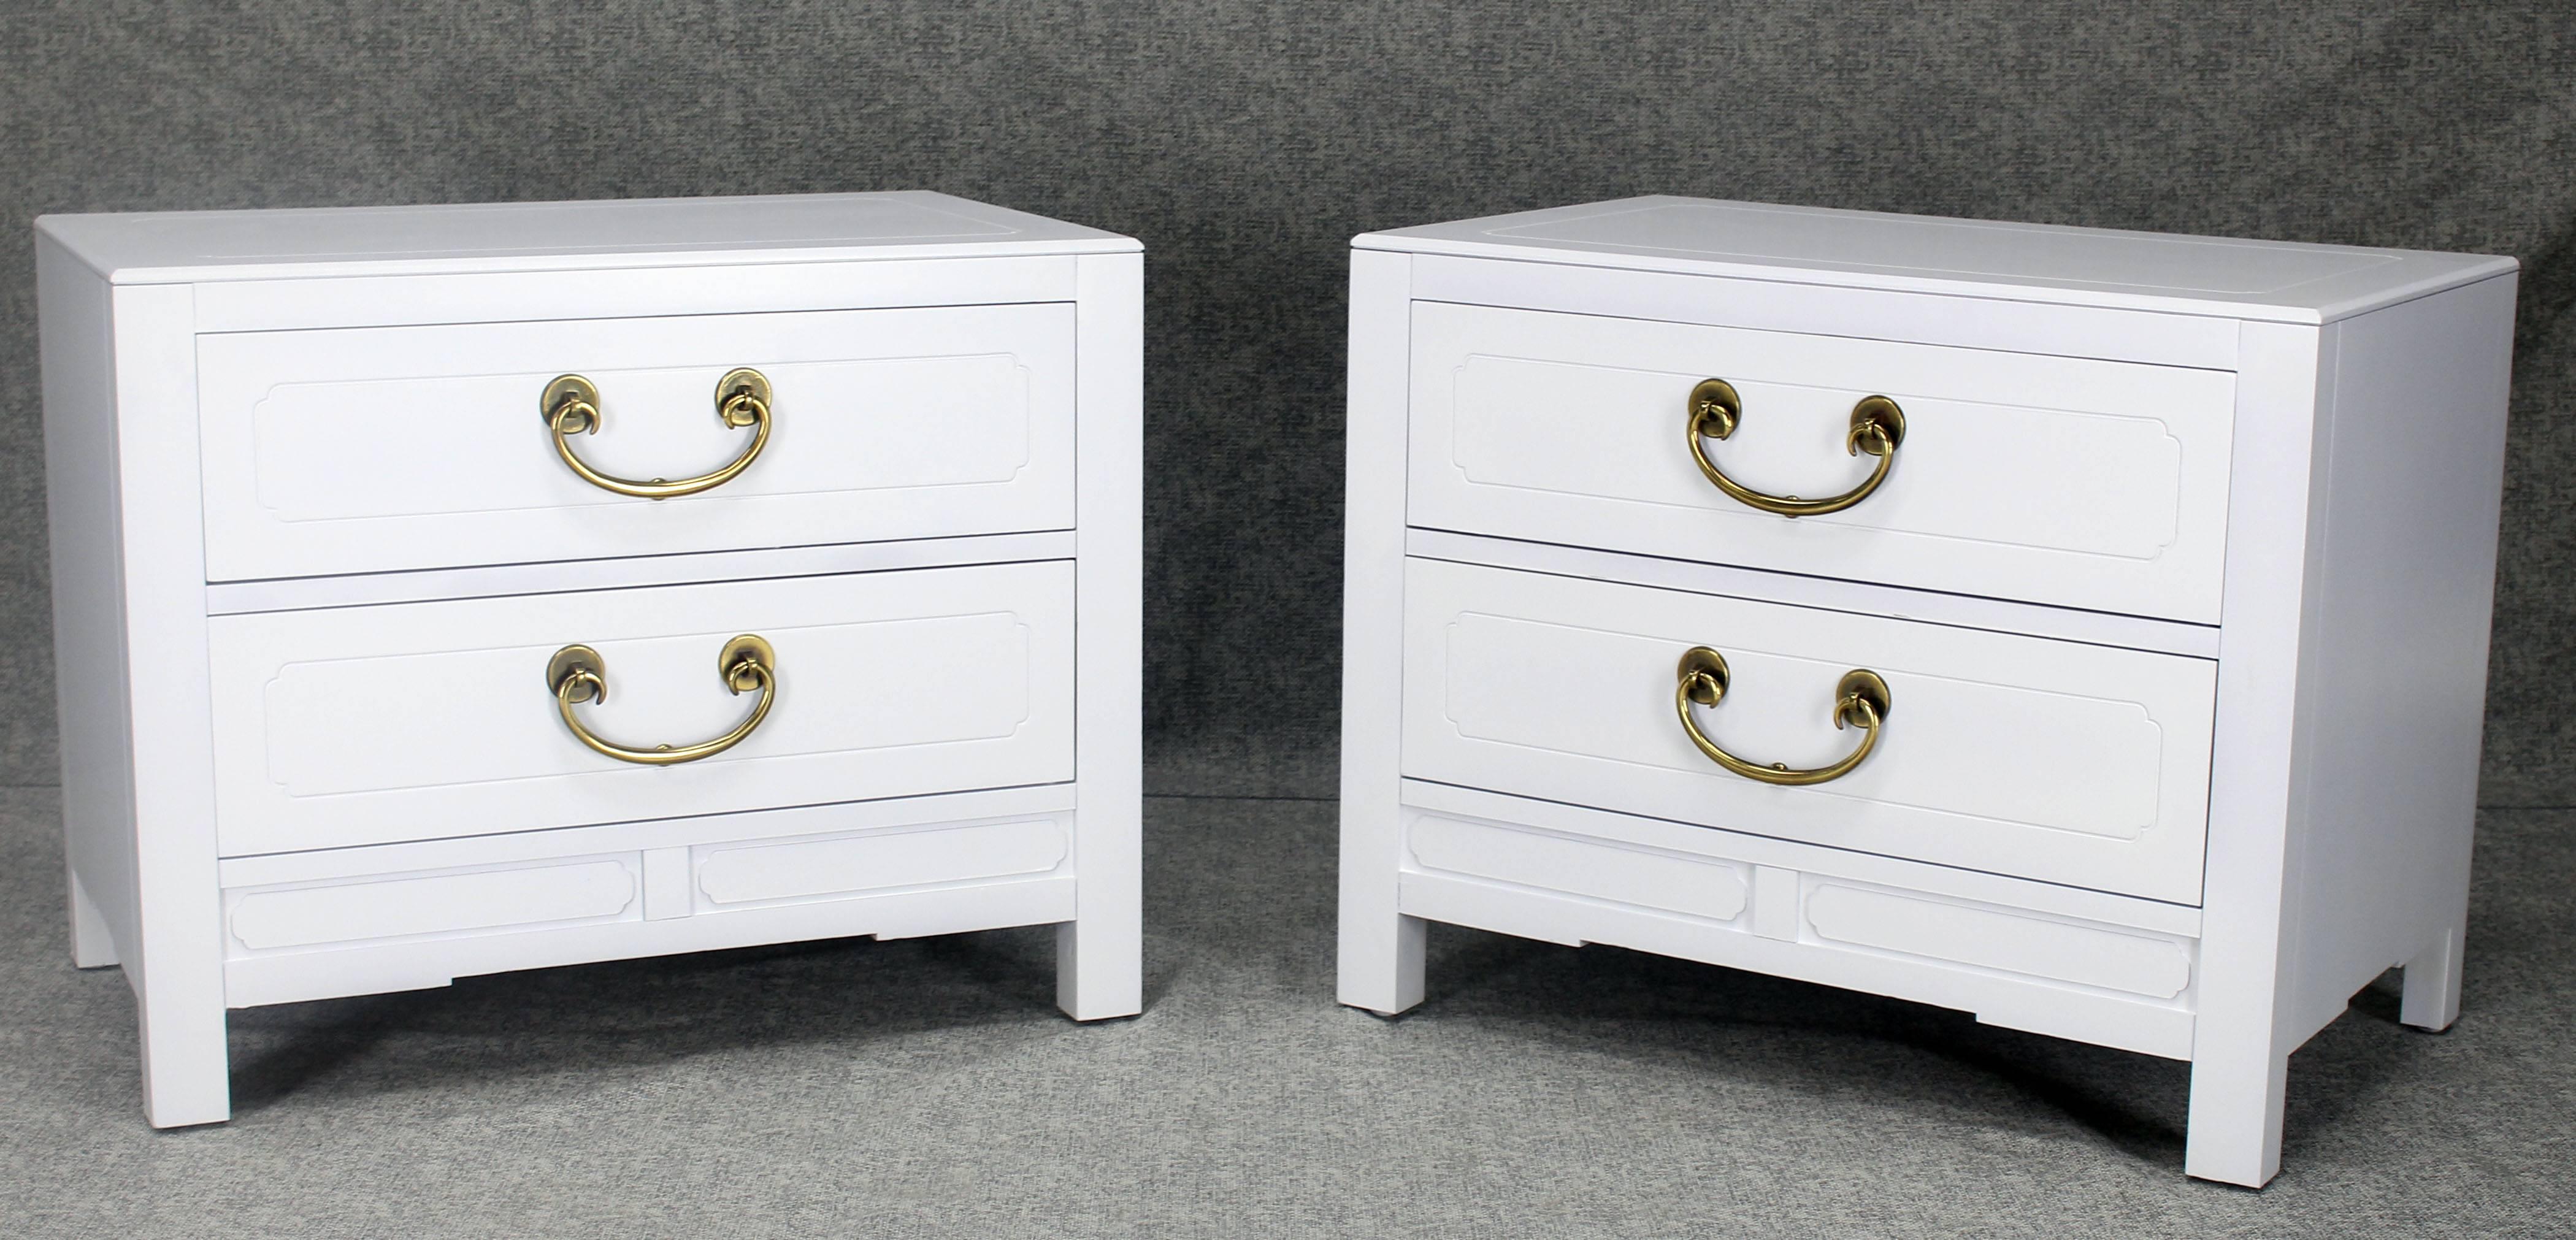 Pair of very nice white lacquer two-drawer stands, cabinets or nightstands with brass pulls. Medium gloss finish.
 